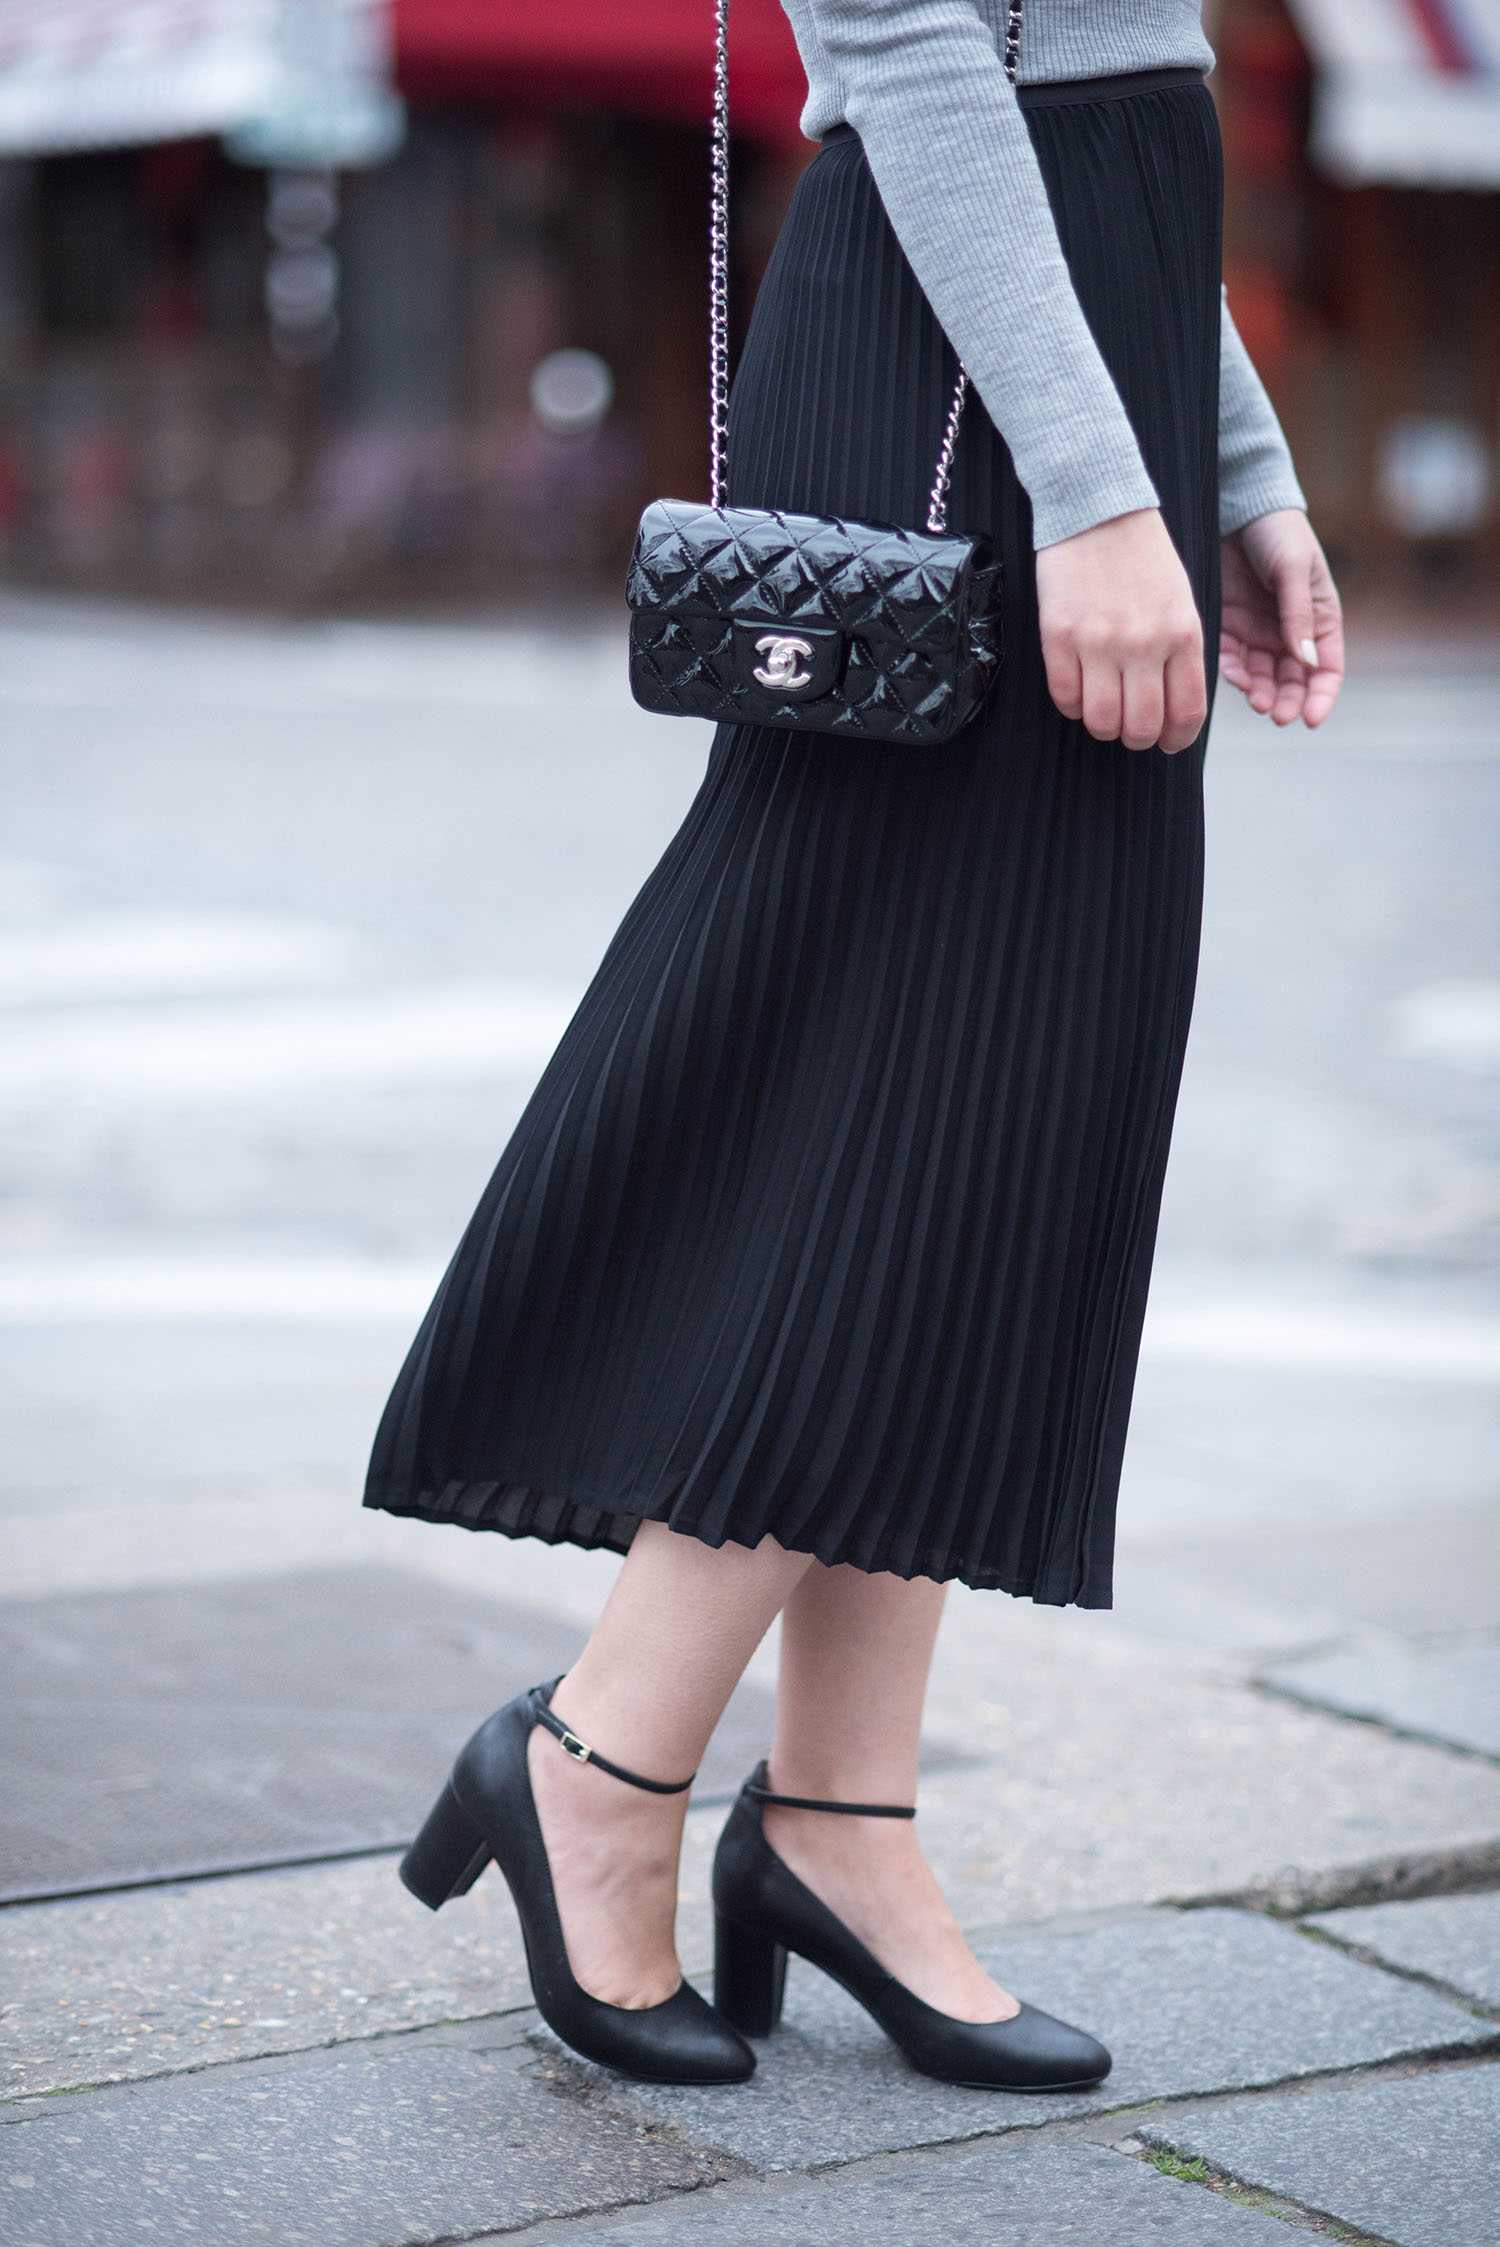 Outfit details on personal style blogger Cee Fardoe of Coco & Vera, wearing an Aritzia pleated skirt and Chanel handbag